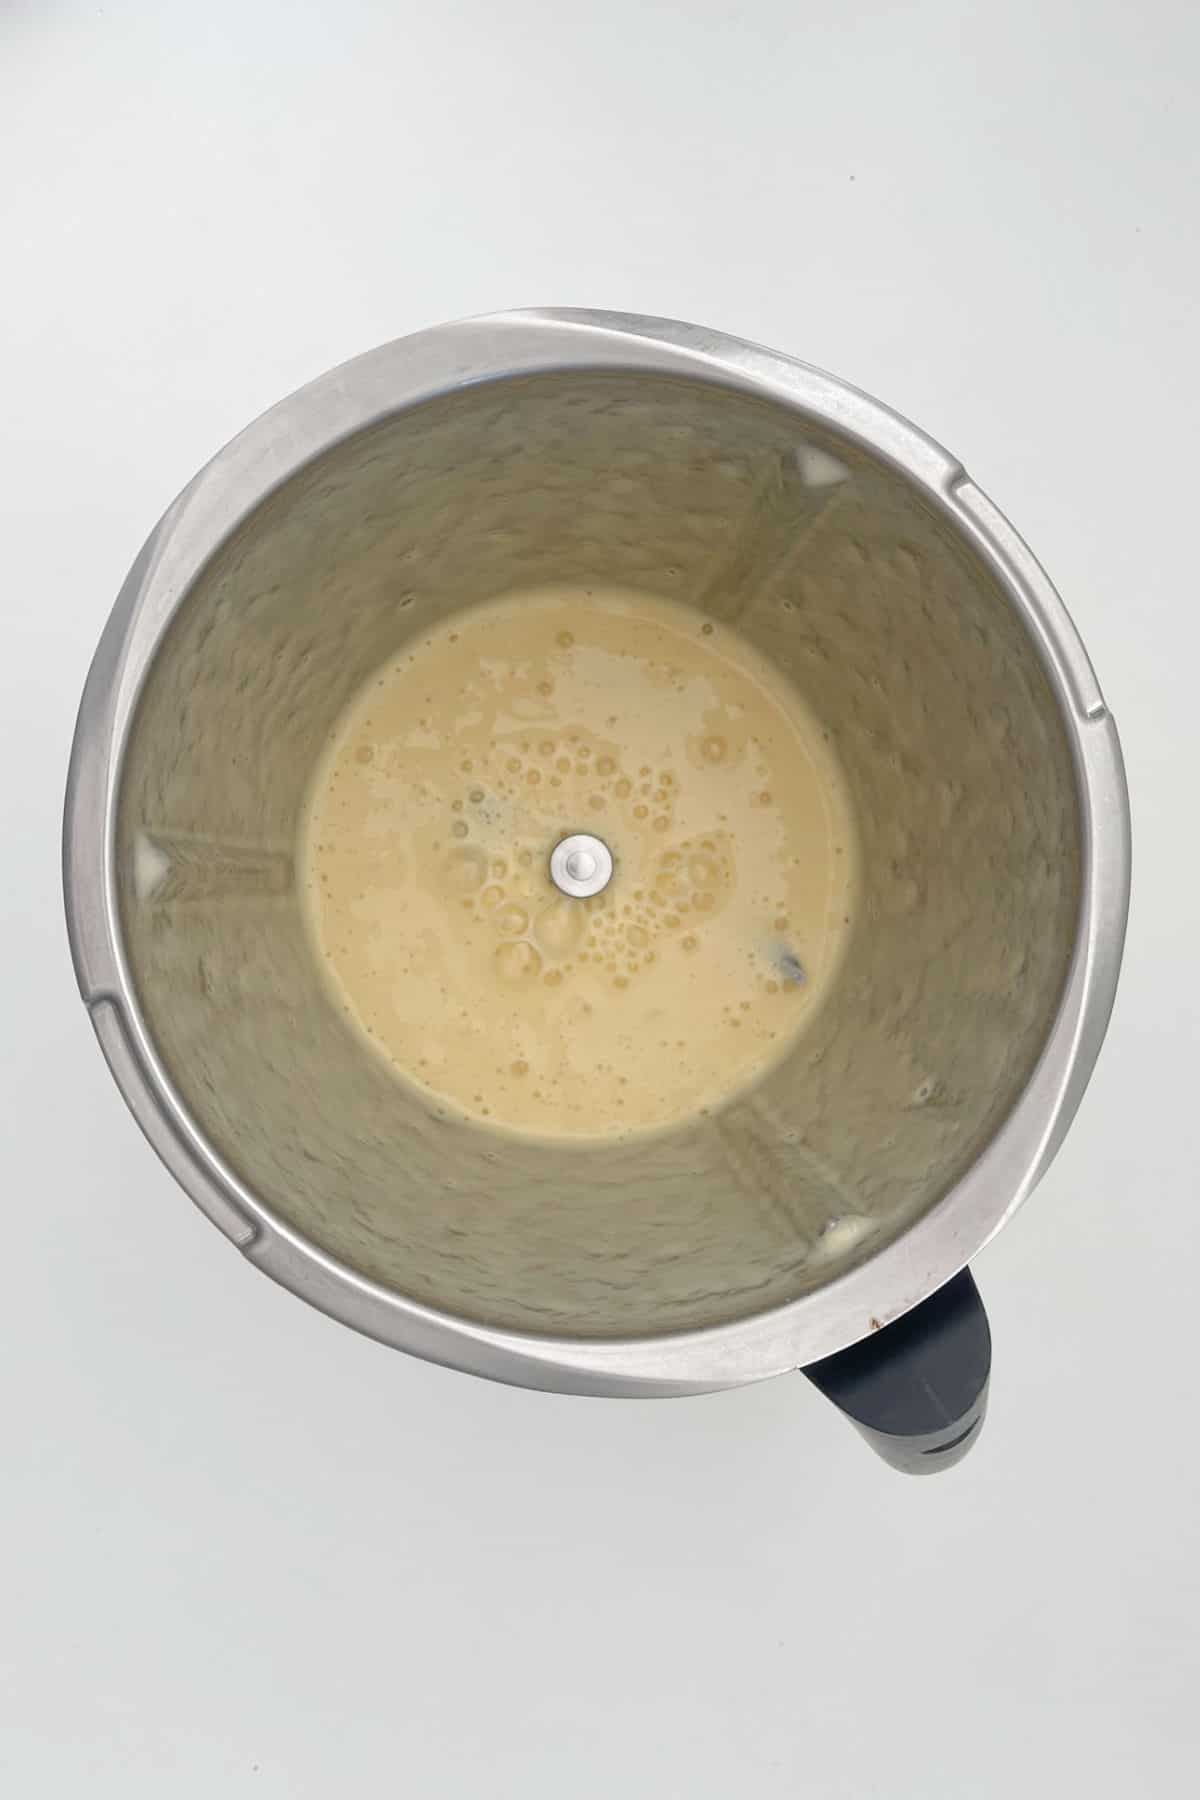 Mango Smoothie in a Thermomix bowl.